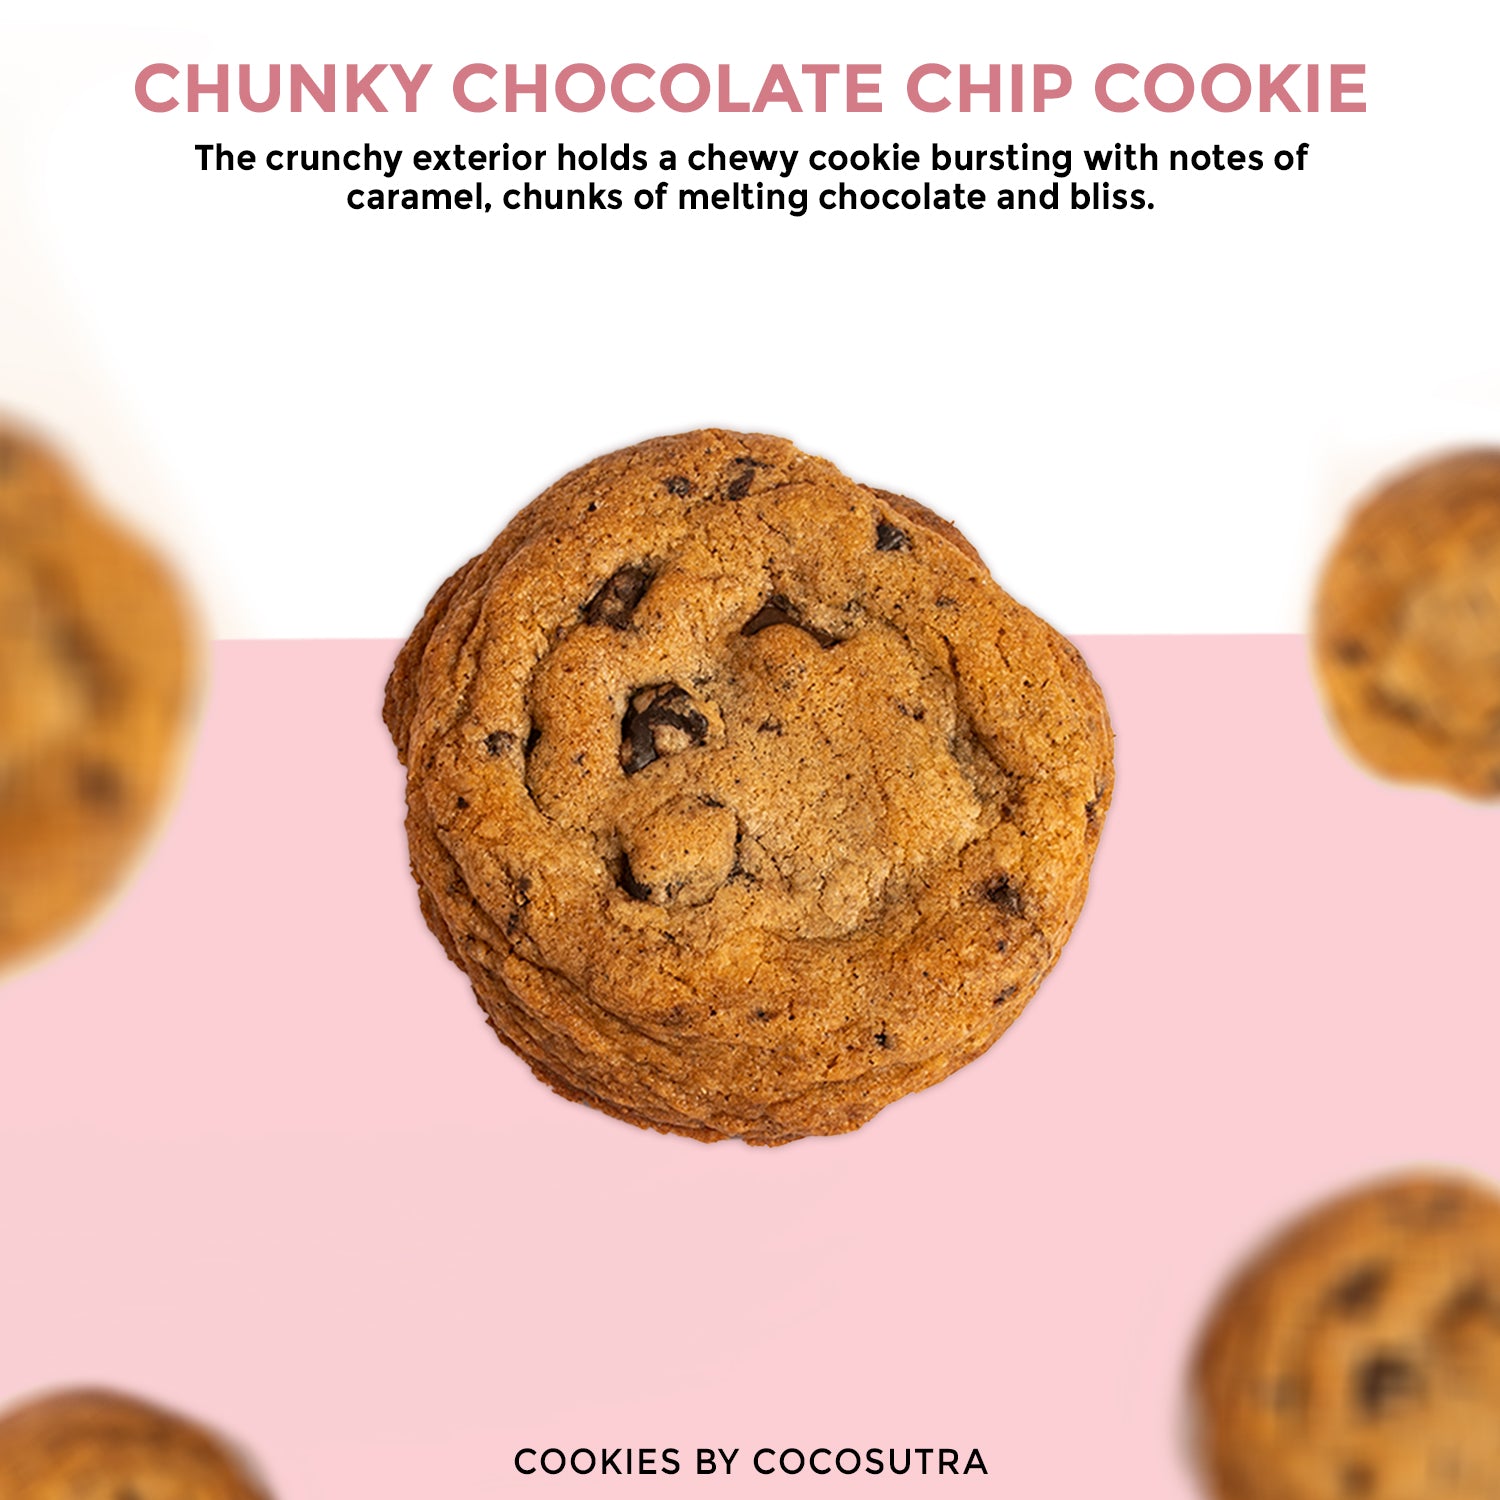 Cocosutra Assorted Goumet Cookies - Chunky Chocolate Chip